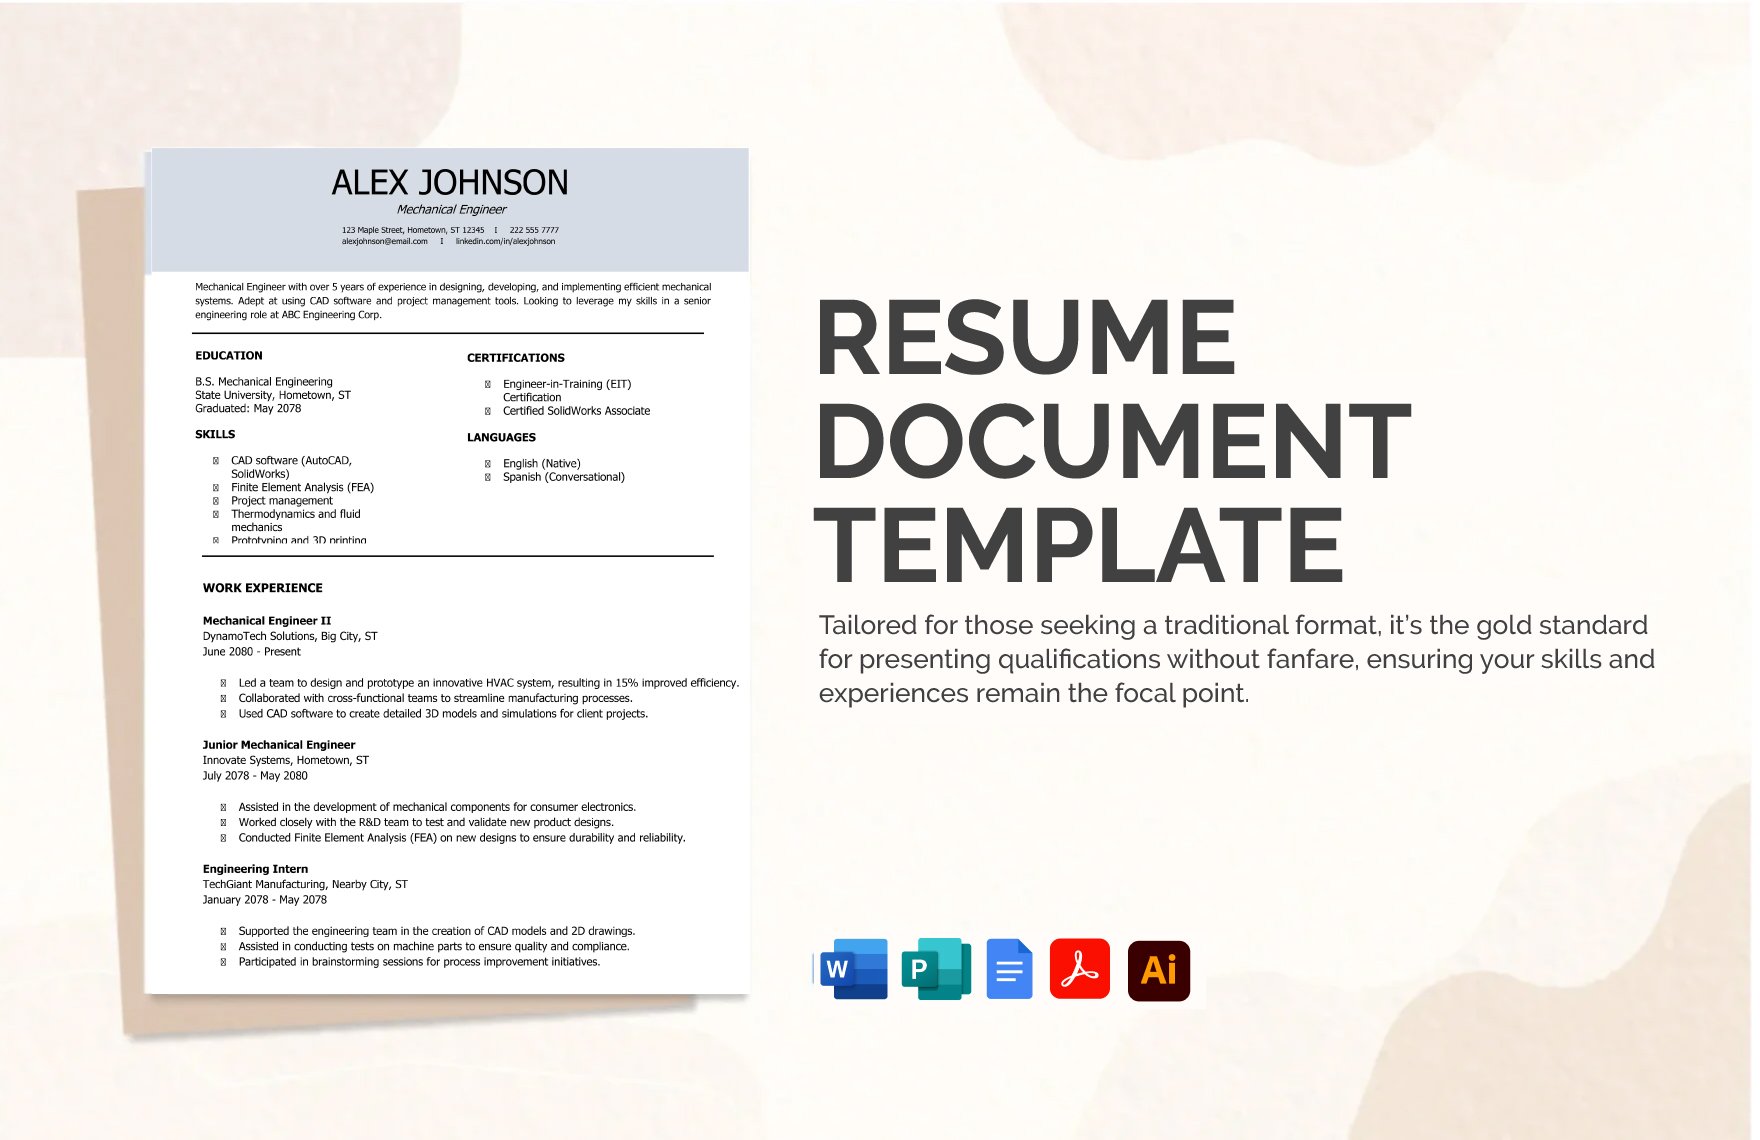 Free Basic Resume Template in Word, Google Docs, PDF, Illustrator, Apple Pages, Publisher